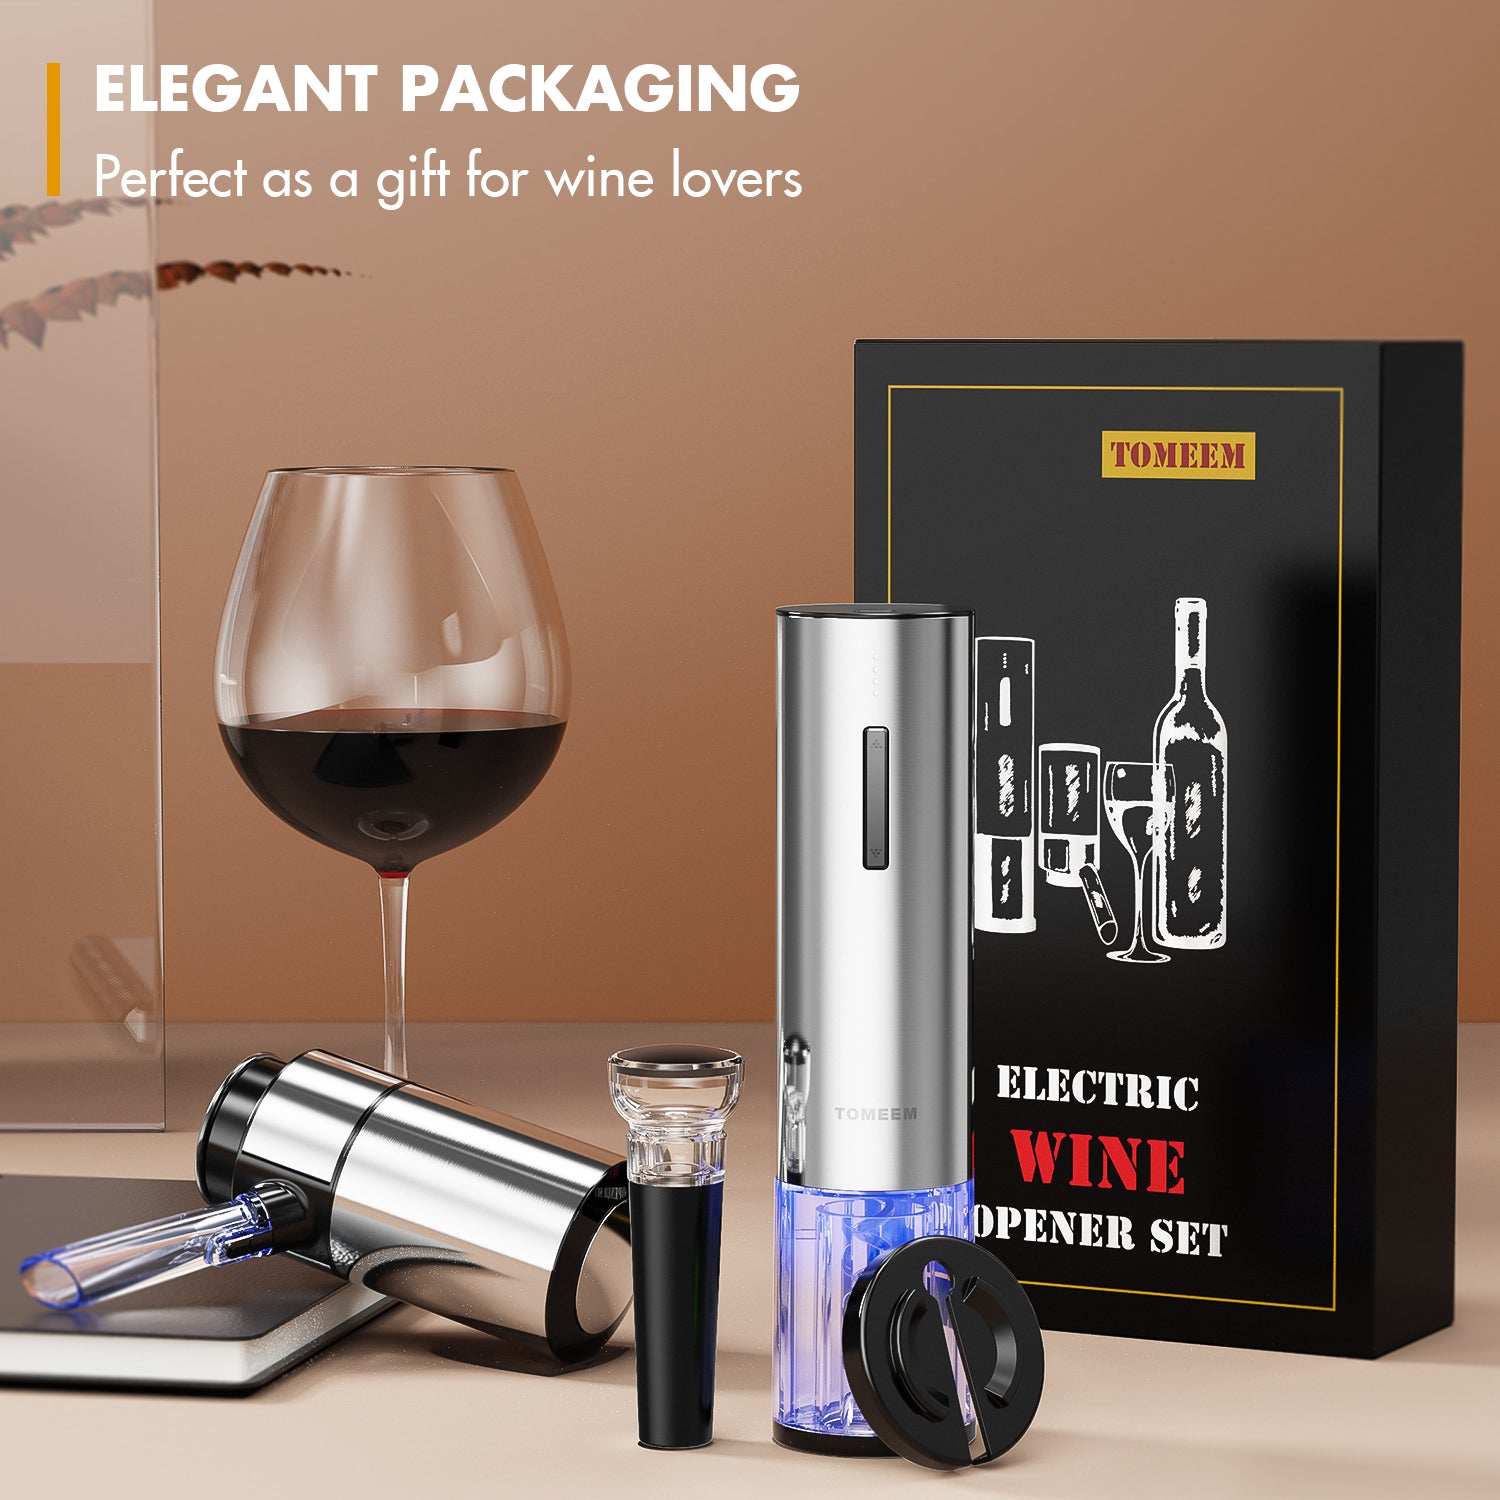 Buy Deoxys Electric Wine Opener Set, Battery-Powered Corkscrew Wine Bottle  Opener Automatic Wine Accessories Contains Foil Cutter,Wine Vacuum Pump  Stopper,Aerator Pourer,Wine Saver,Gift Set Online at Low Prices in India -  Amazon.in